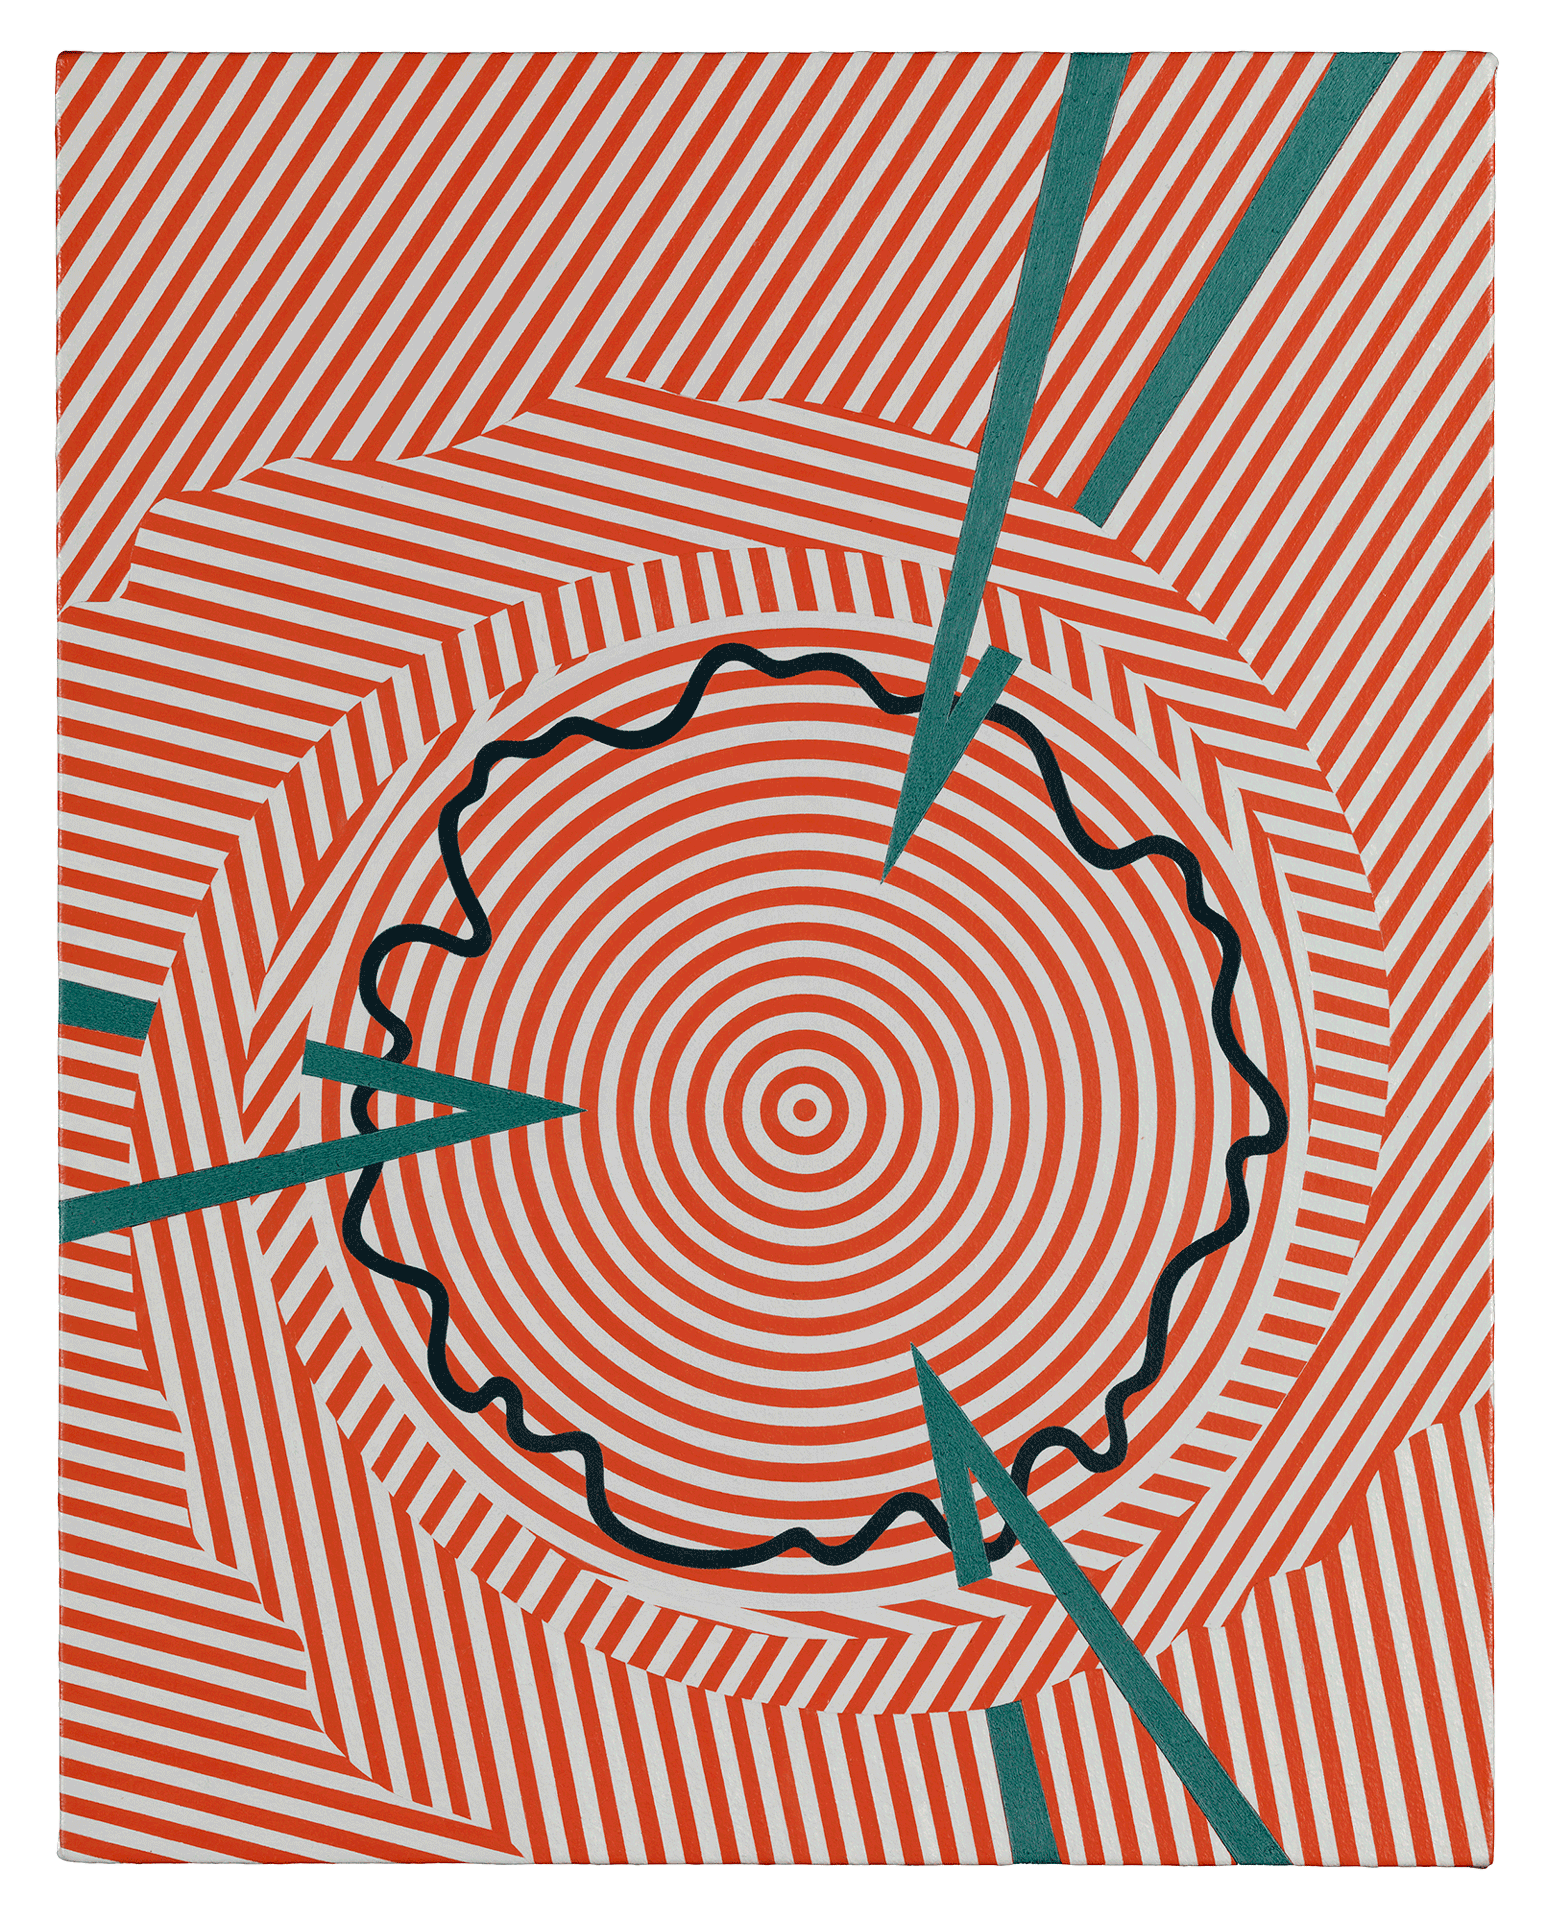 A painting by Tomma Abts, titled Feio, dated 2007.